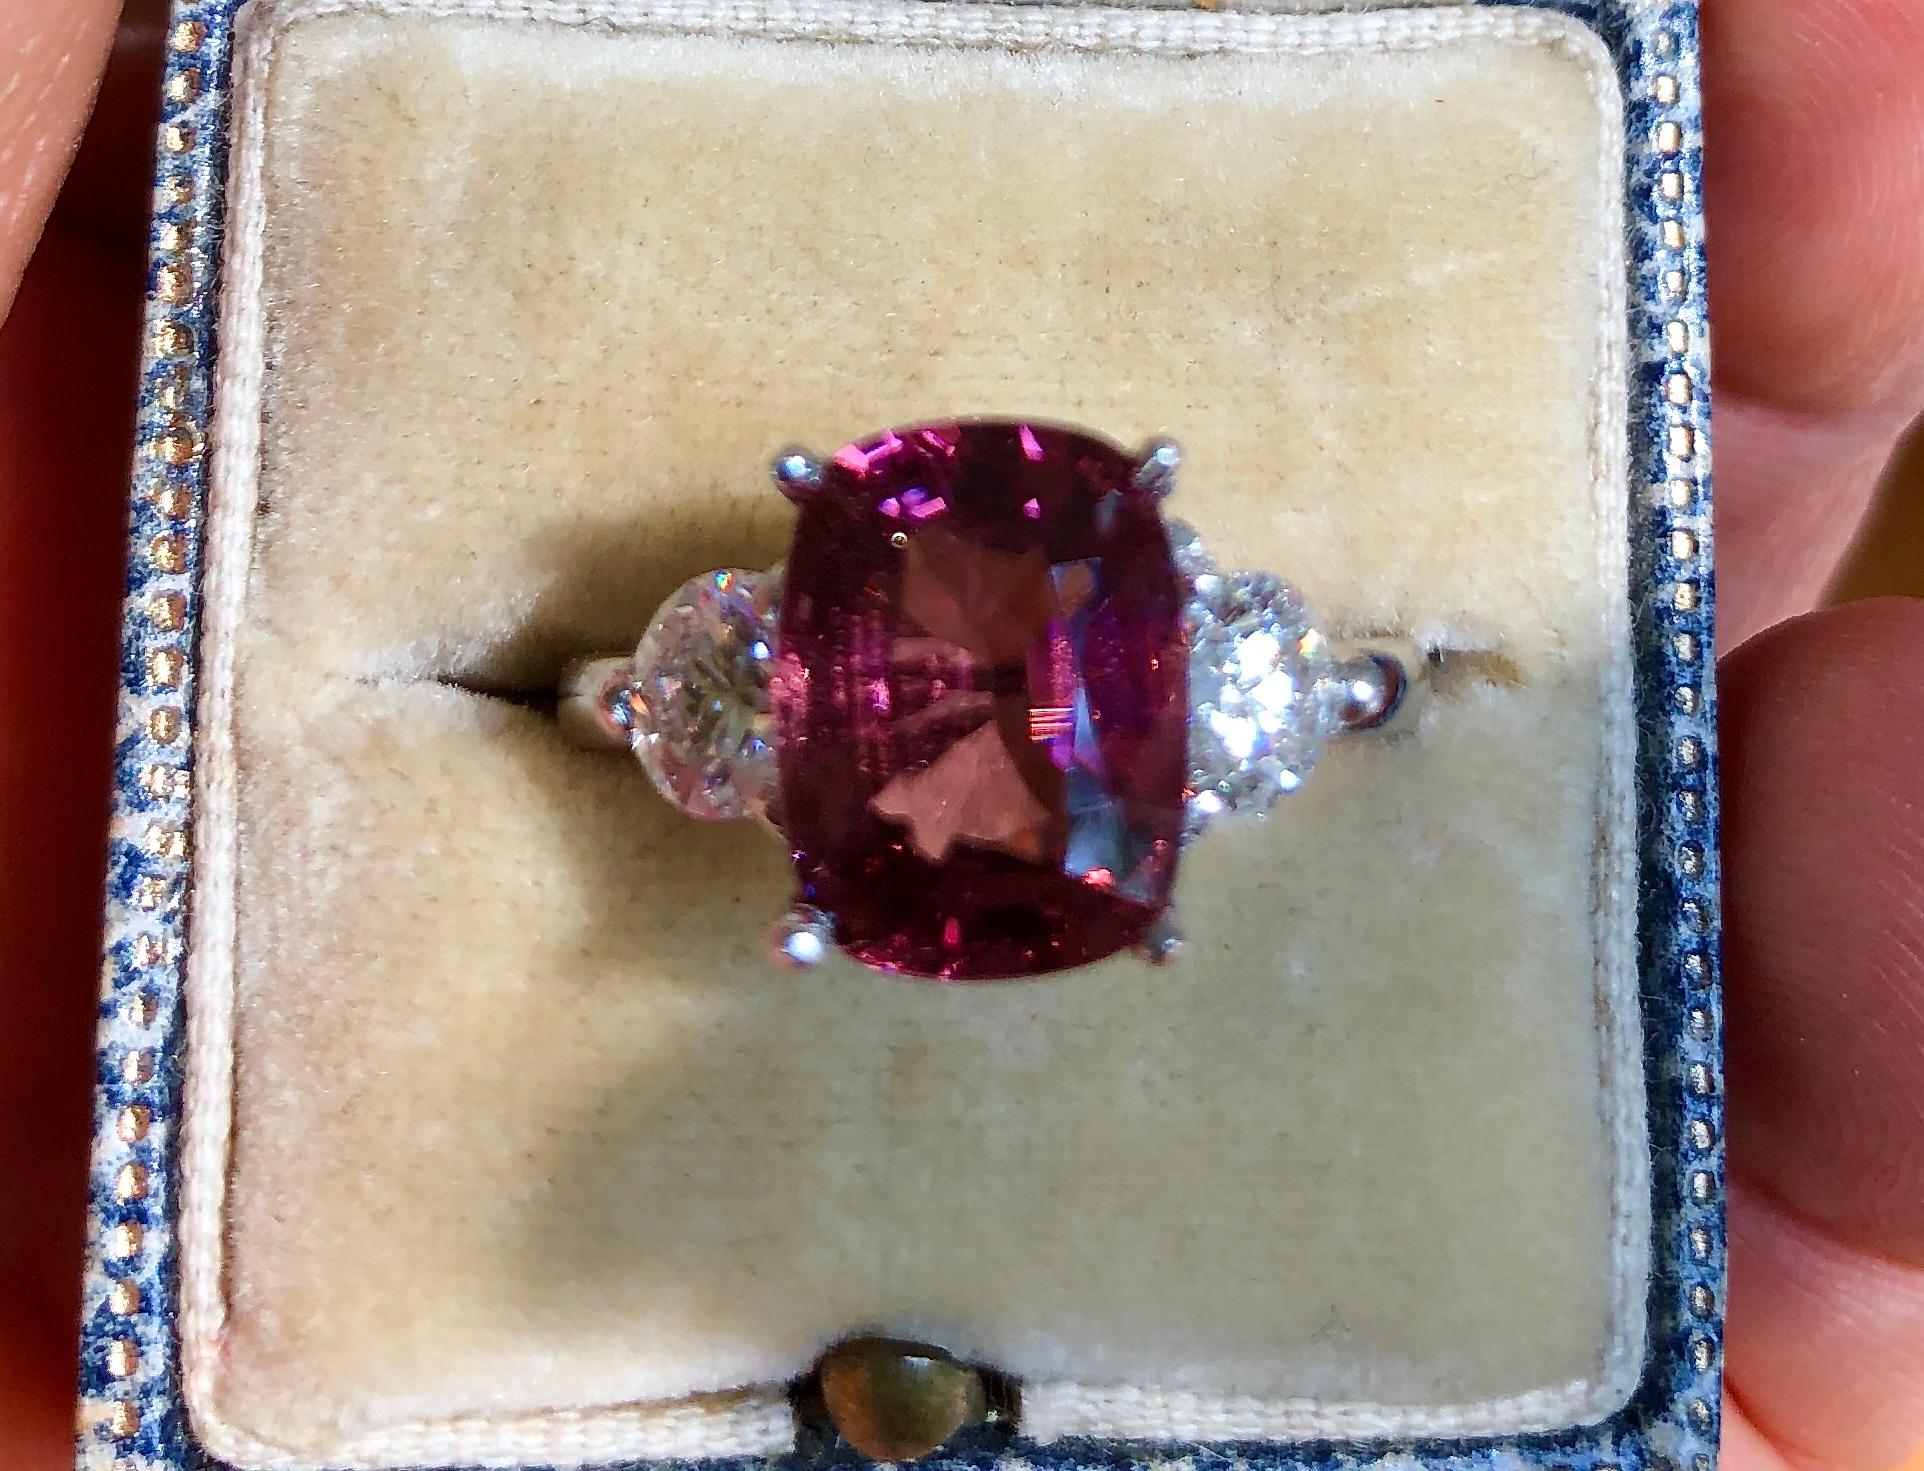 A vibrant purple-pinkish red 4.16 carat cushion-cut natural Spinel is the centerpiece of this ring. The vibrant gemstone is highlighted by two round brilliant cut diamonds weighing 0.94 carats, H-SI2-. This sparkling natural spinel has an amazing